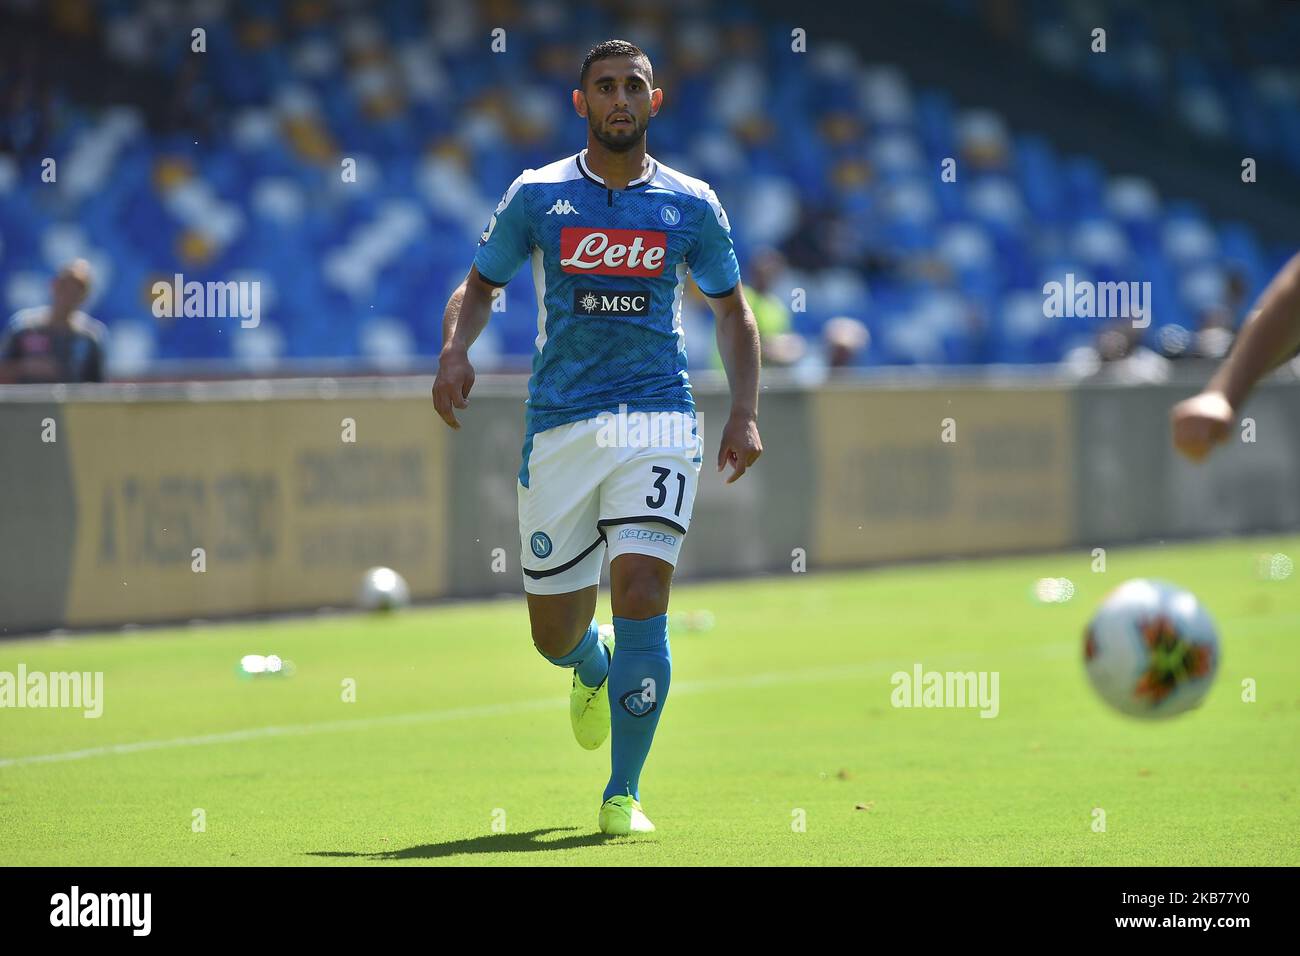 Faouzi Ghoulam of SSC Napoli during the Serie A TIM match between SSC Napoli and Brescia Calcio at Stadio San Paolo Naples Italy on 29 September 2019. (Photo Franco Romano) Stock Photo